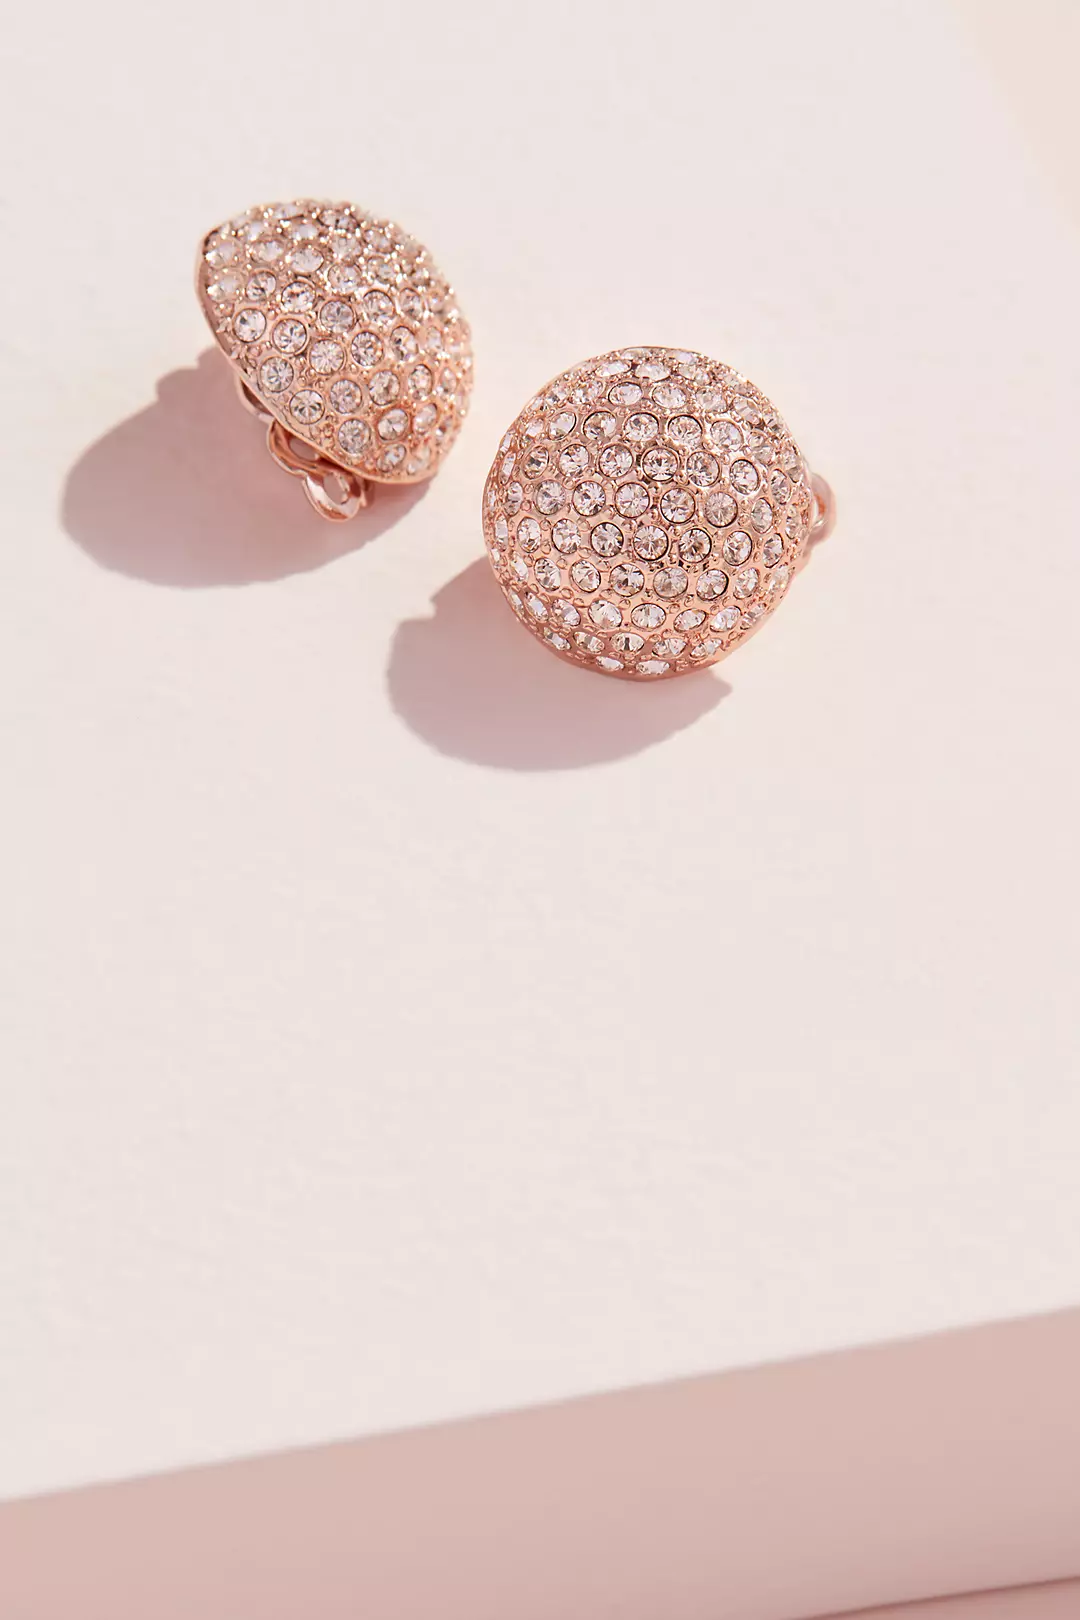 Swarovski Pave Crystal Clip-On Button Earrings Image